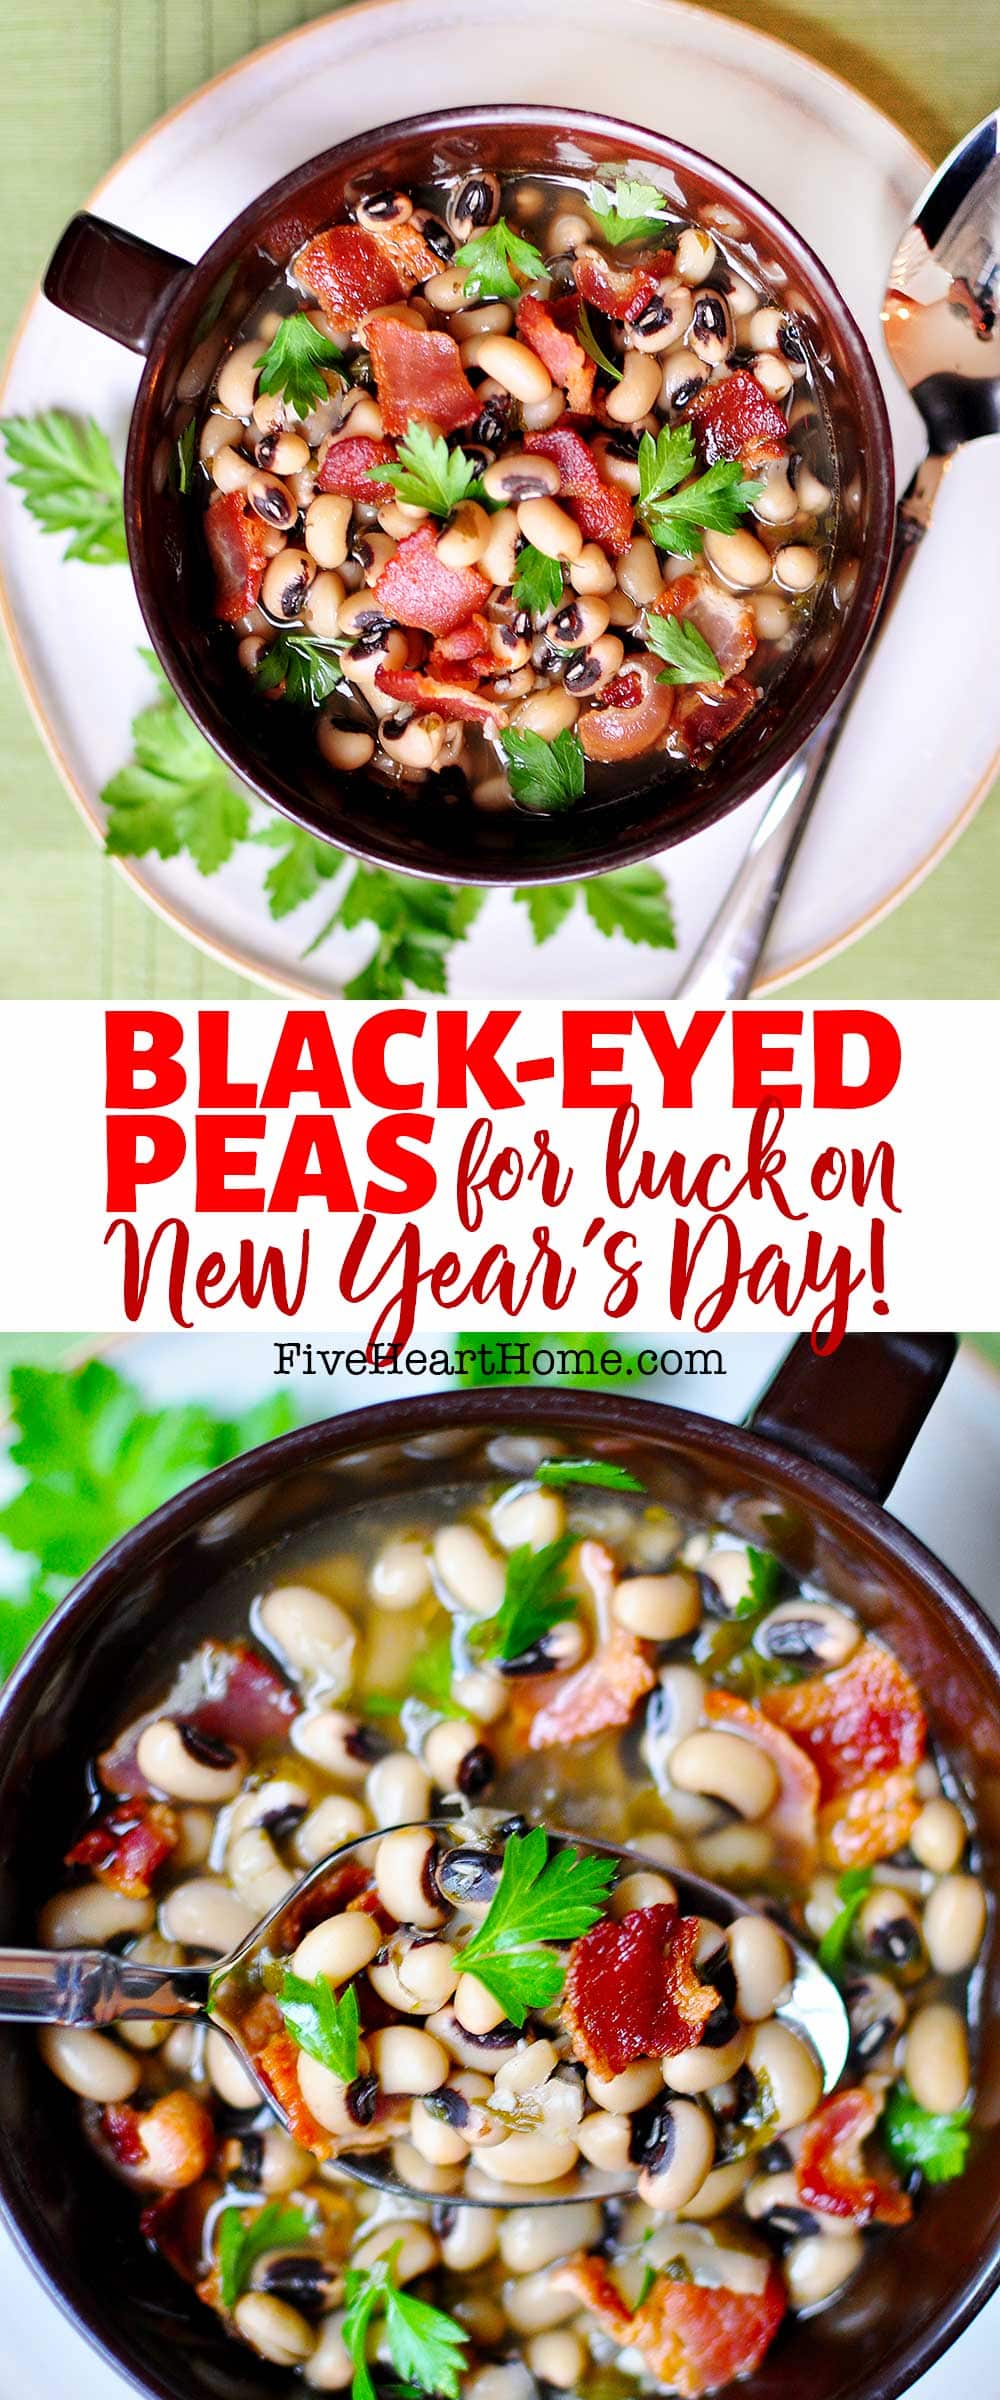 Black-Eyed Peas New Year's Recipe ~ flavored with bacon, garlic, and thyme, this savory, delicious soup is said to bring luck and prosperity when eaten on New Year's Day! | FiveHeartHome.com via @fivehearthome